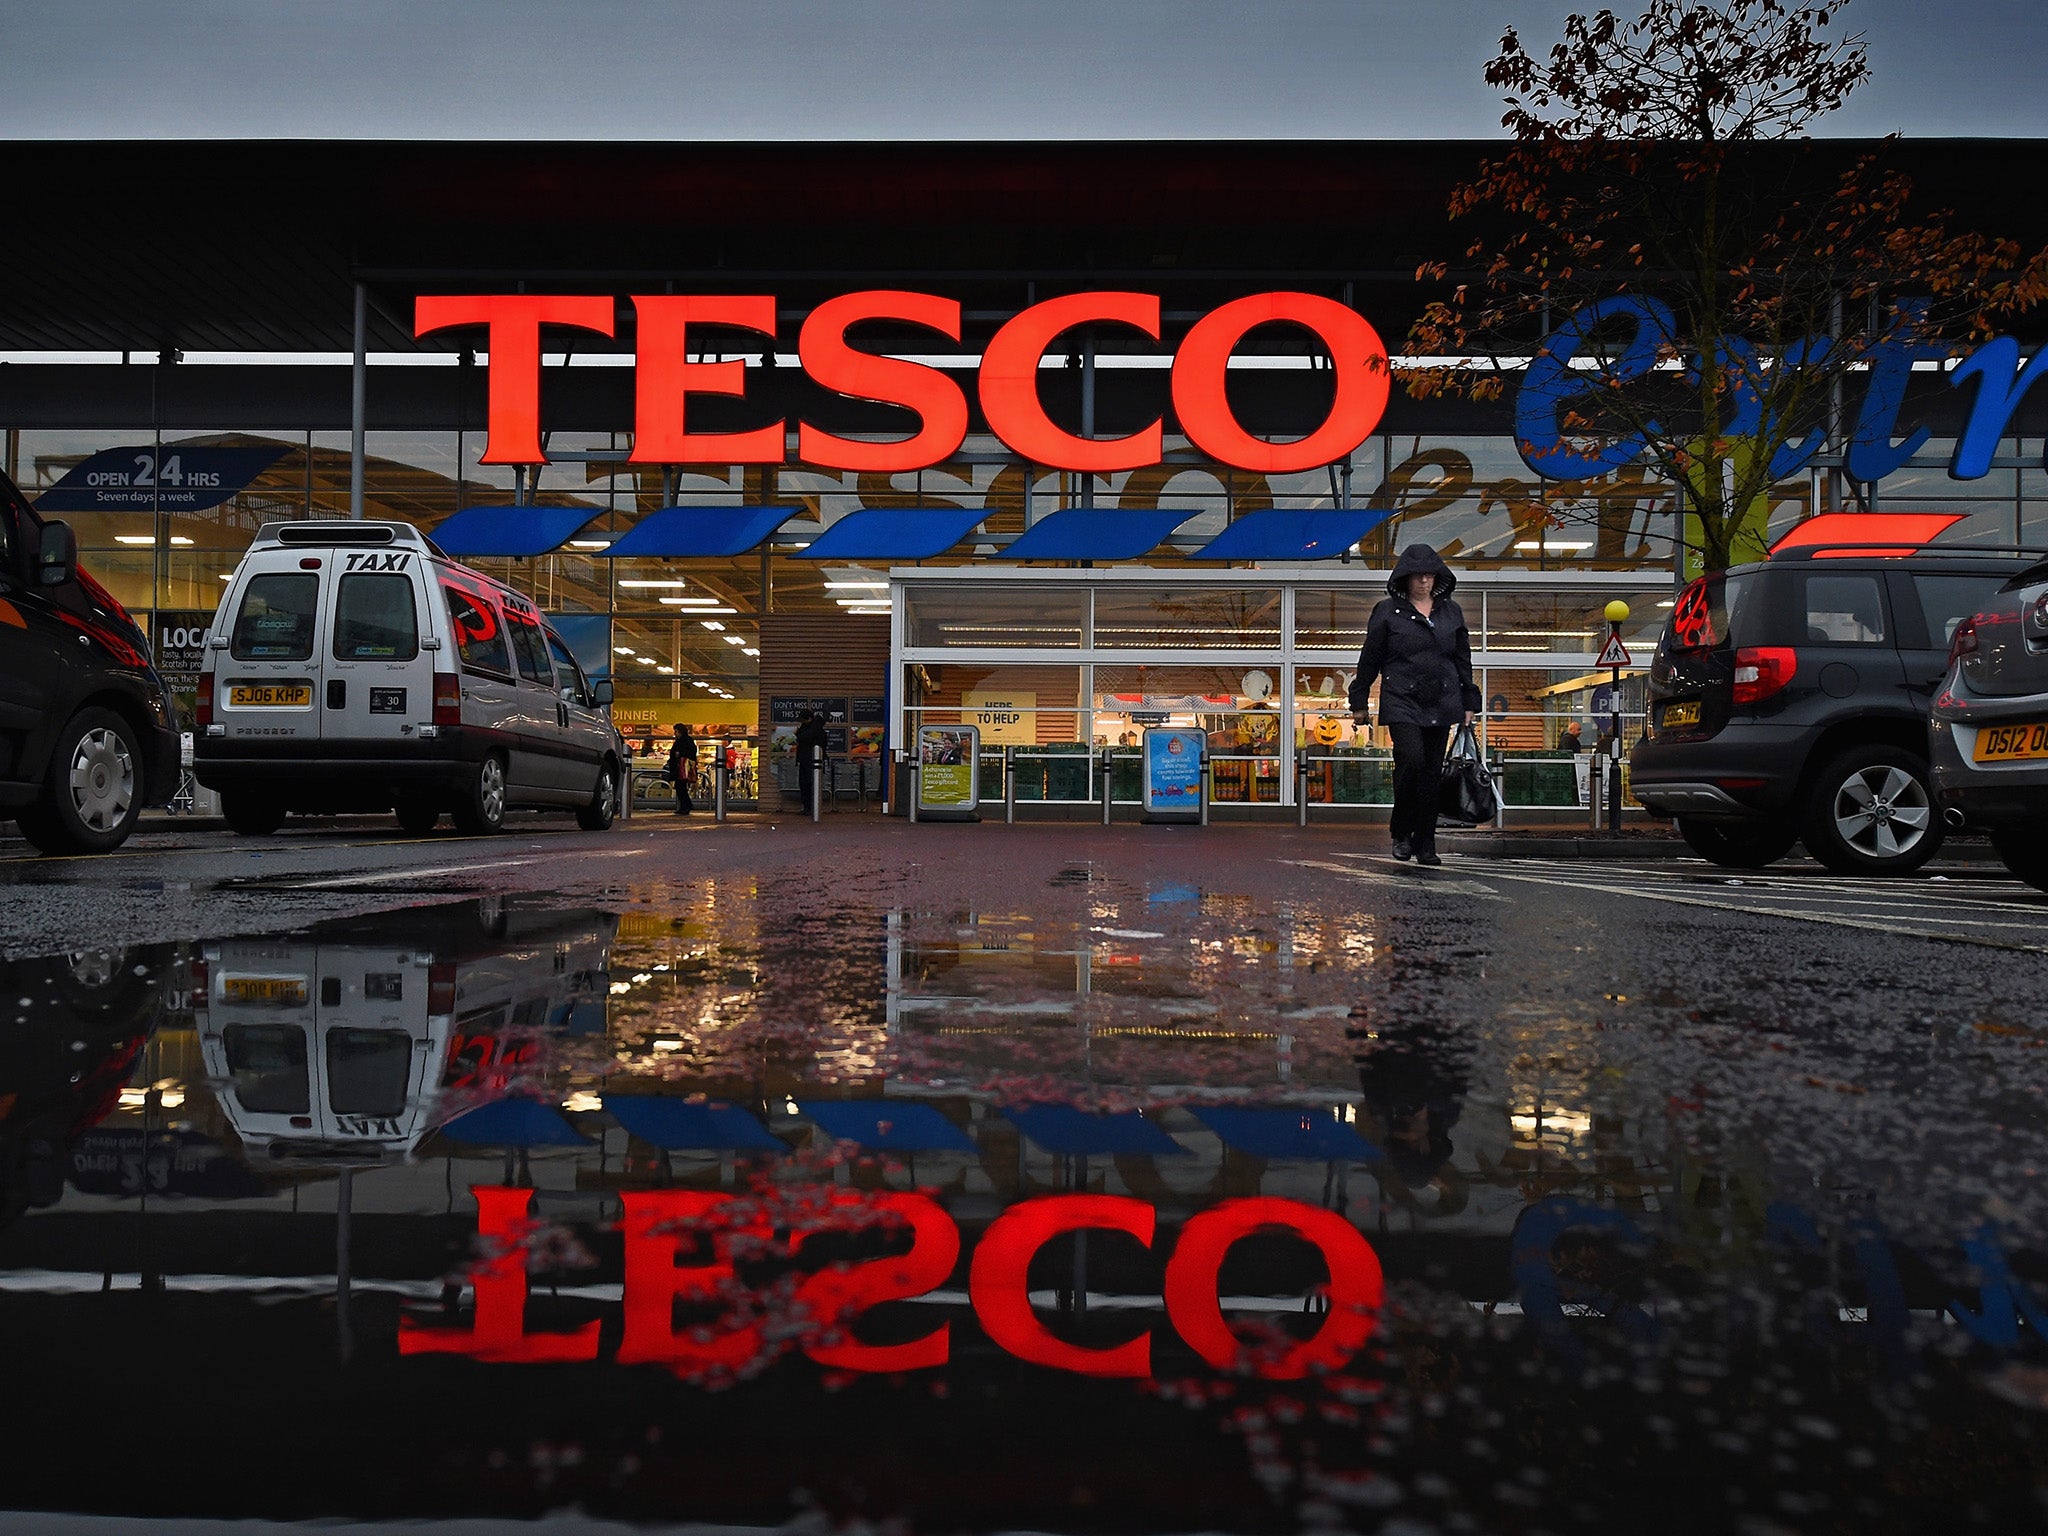 A general view of a Tesco supermarket in Glasgow, Scotland.